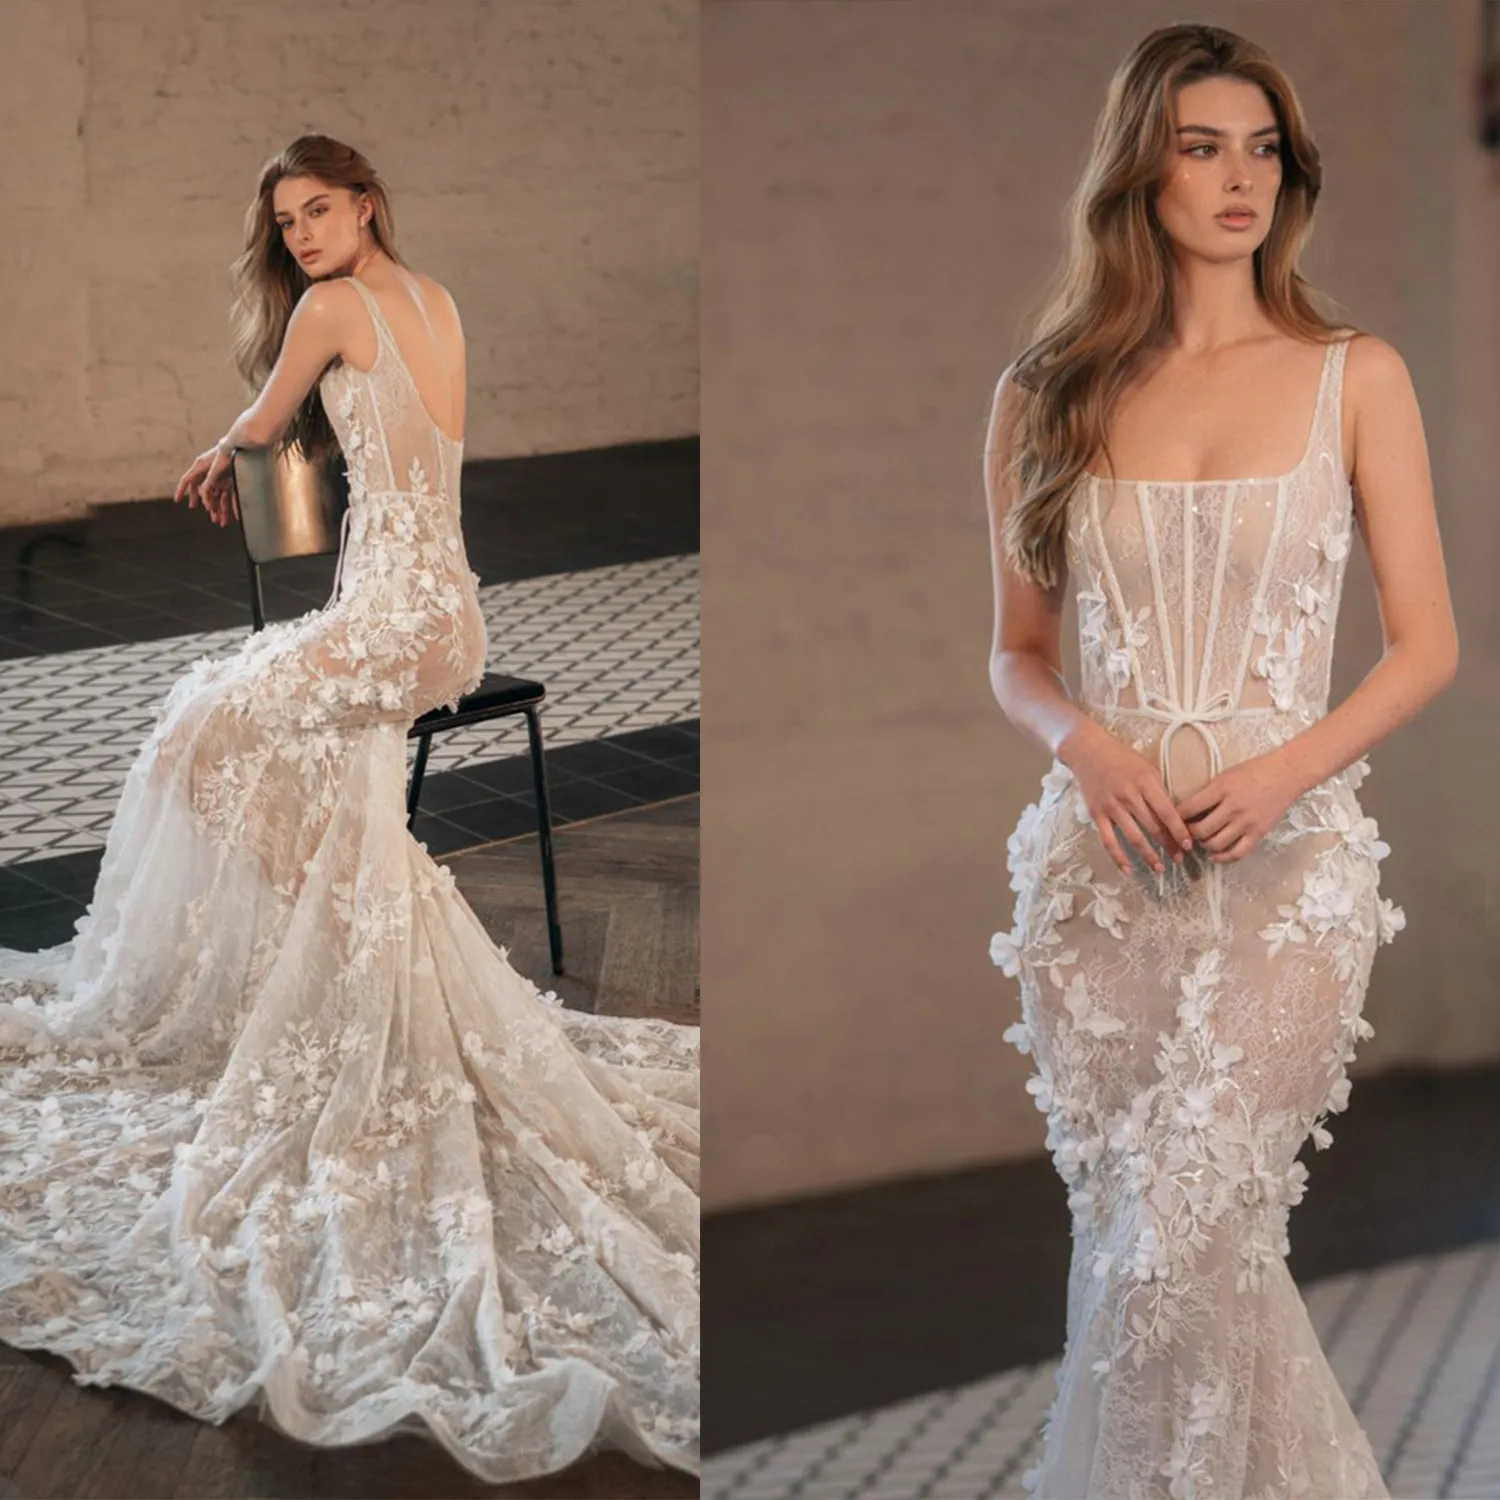 Fancy Spaghetti Straps Mermaid Wedding Dresses See Through Backless Bridal Gowns 3D-Floral Appliques Illusion Sweep Train Robe Bride Dress